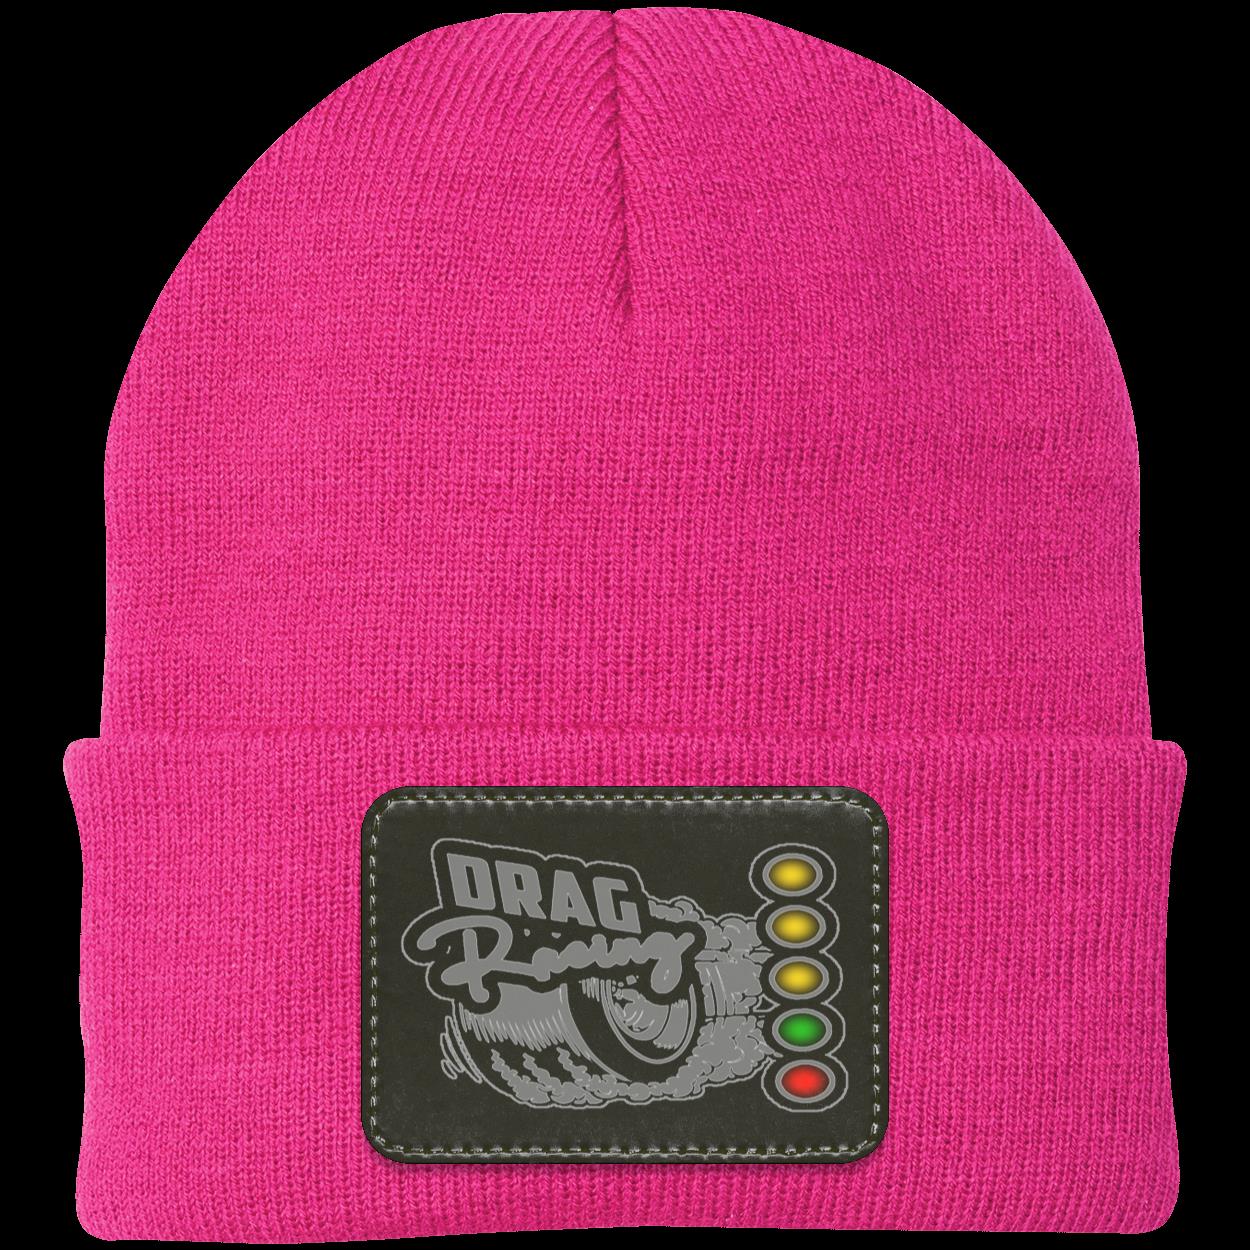 Drag Racing Patched Knit Cap V11